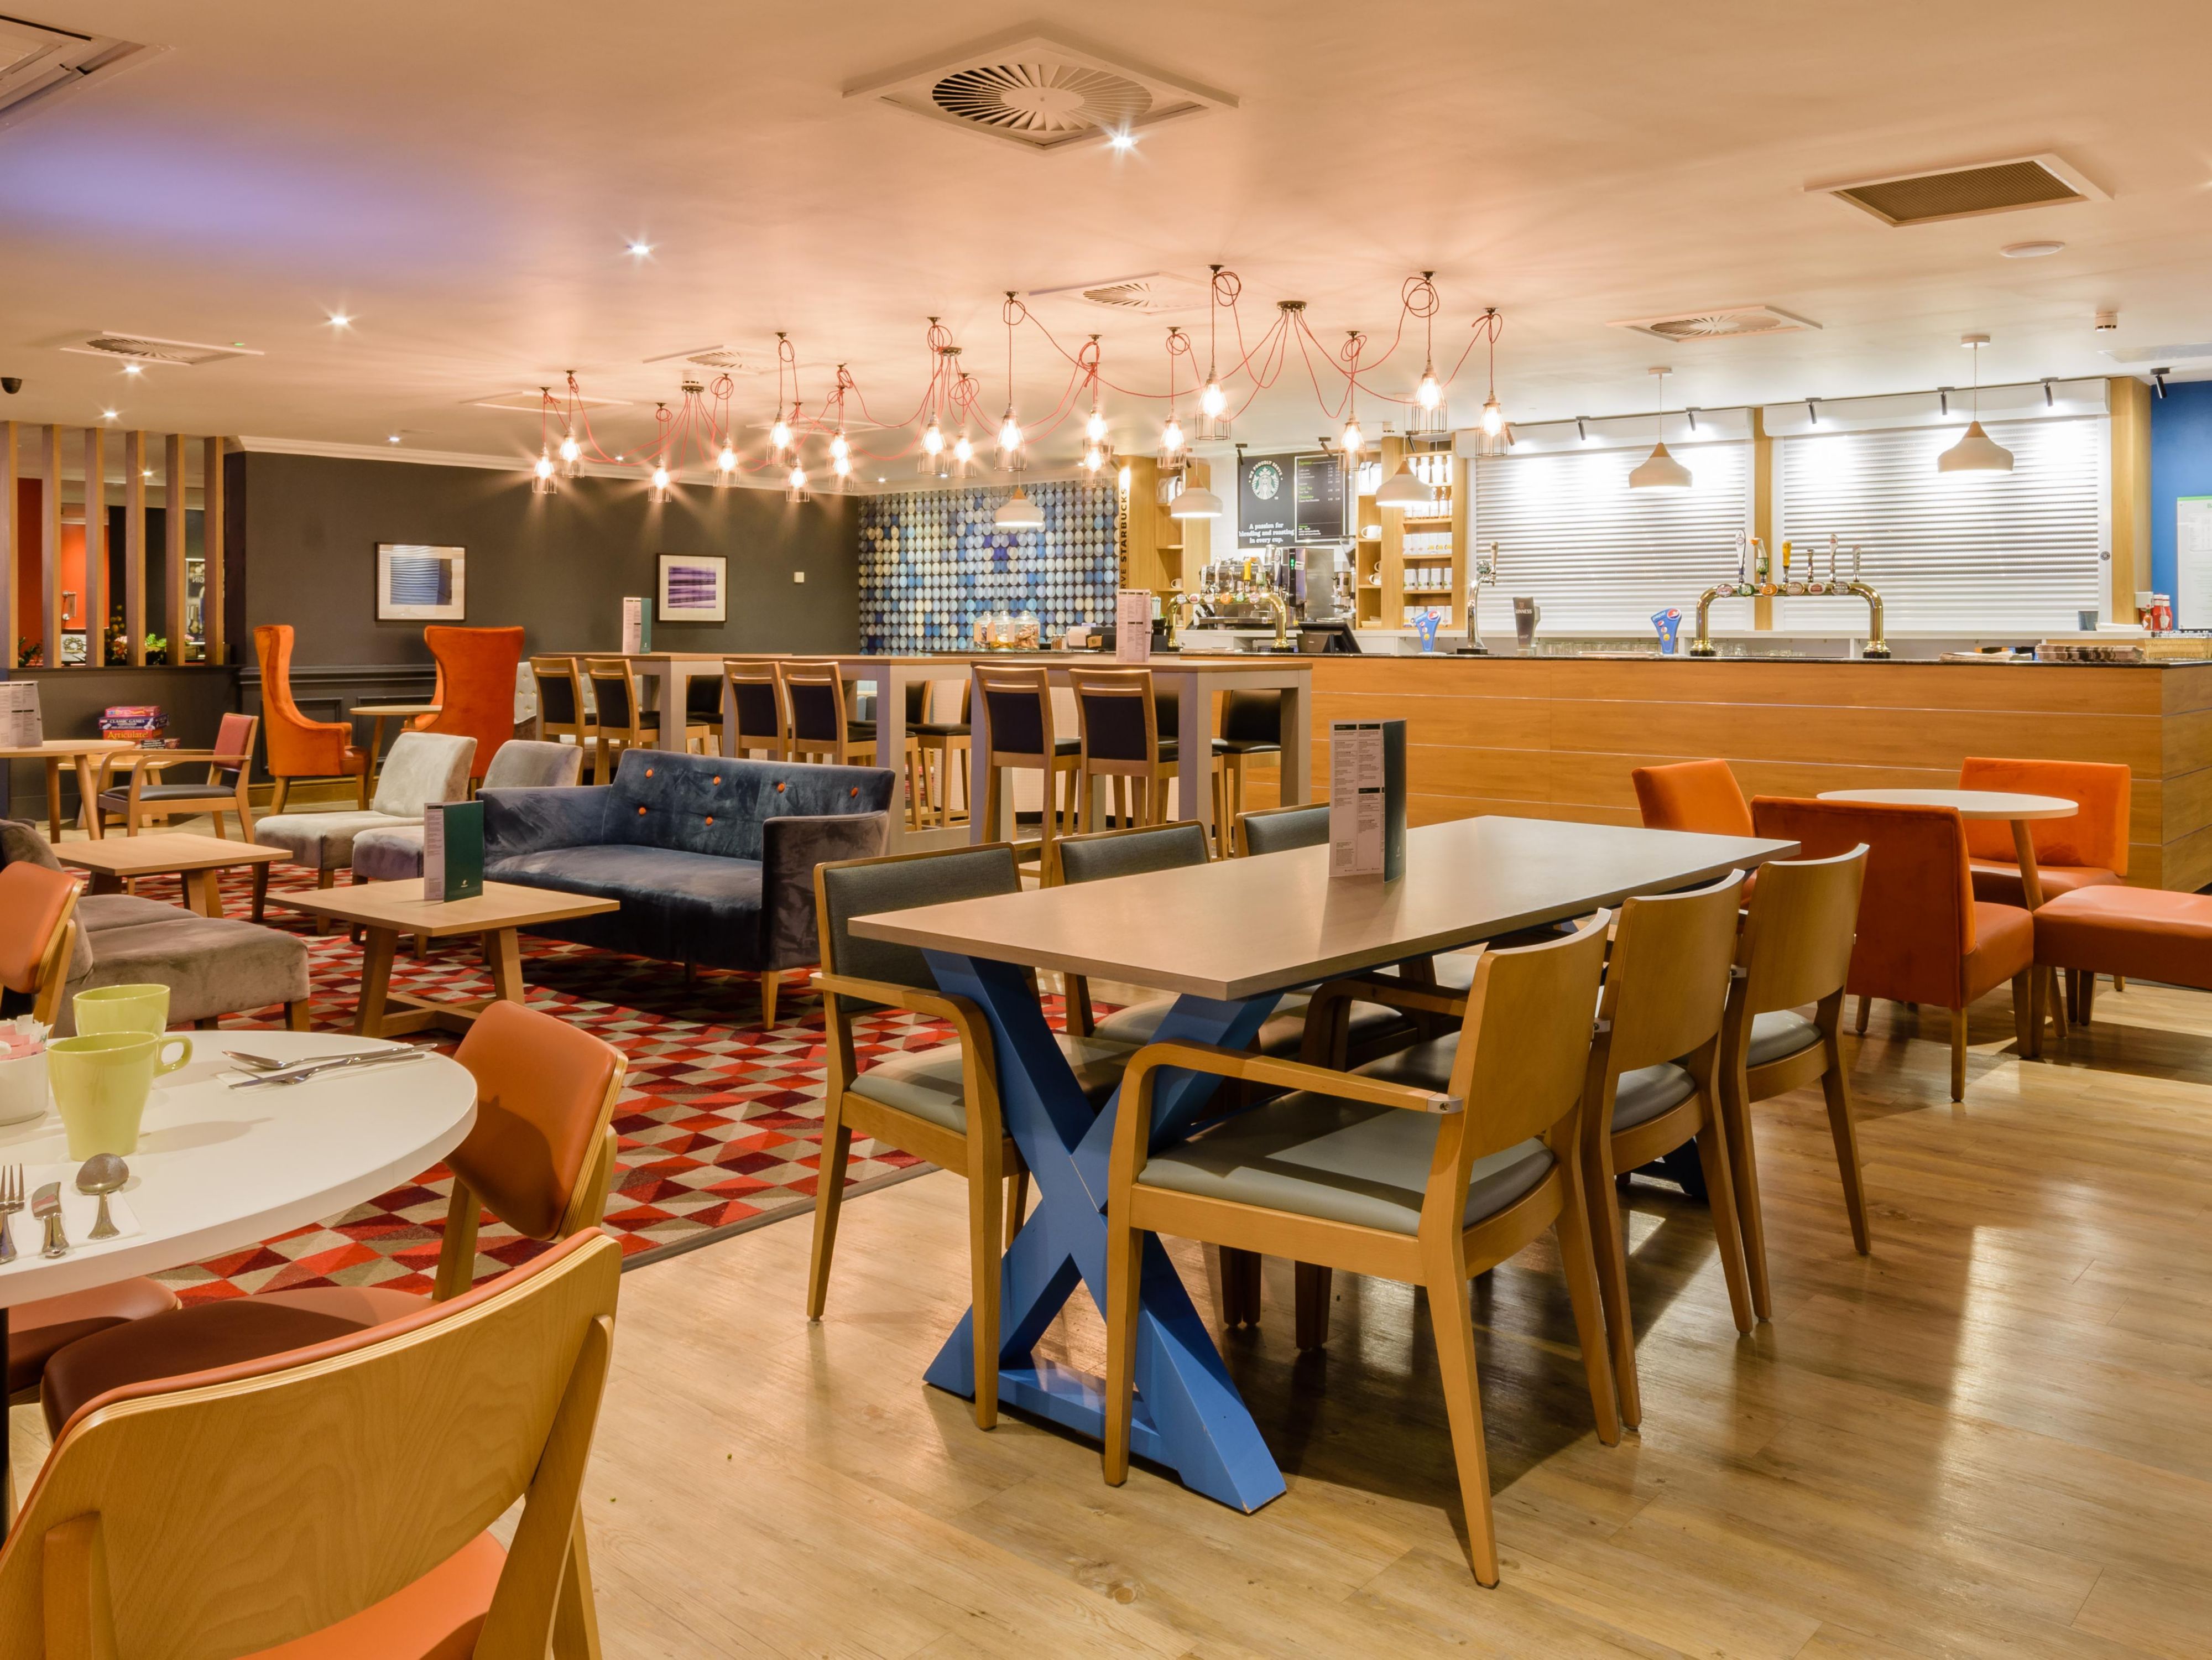 The Open Lobby is a bright, welcoming space where you can relax, dine, socialise and connect. Here at Holiday Inn Leeds Garforth, our chefs source the finest local and seasonal ingredients to create exciting menus for all tastes and occasions. We also have ample outdoor seating so you can enjoy a spot of al fresco dining on warmer days. 